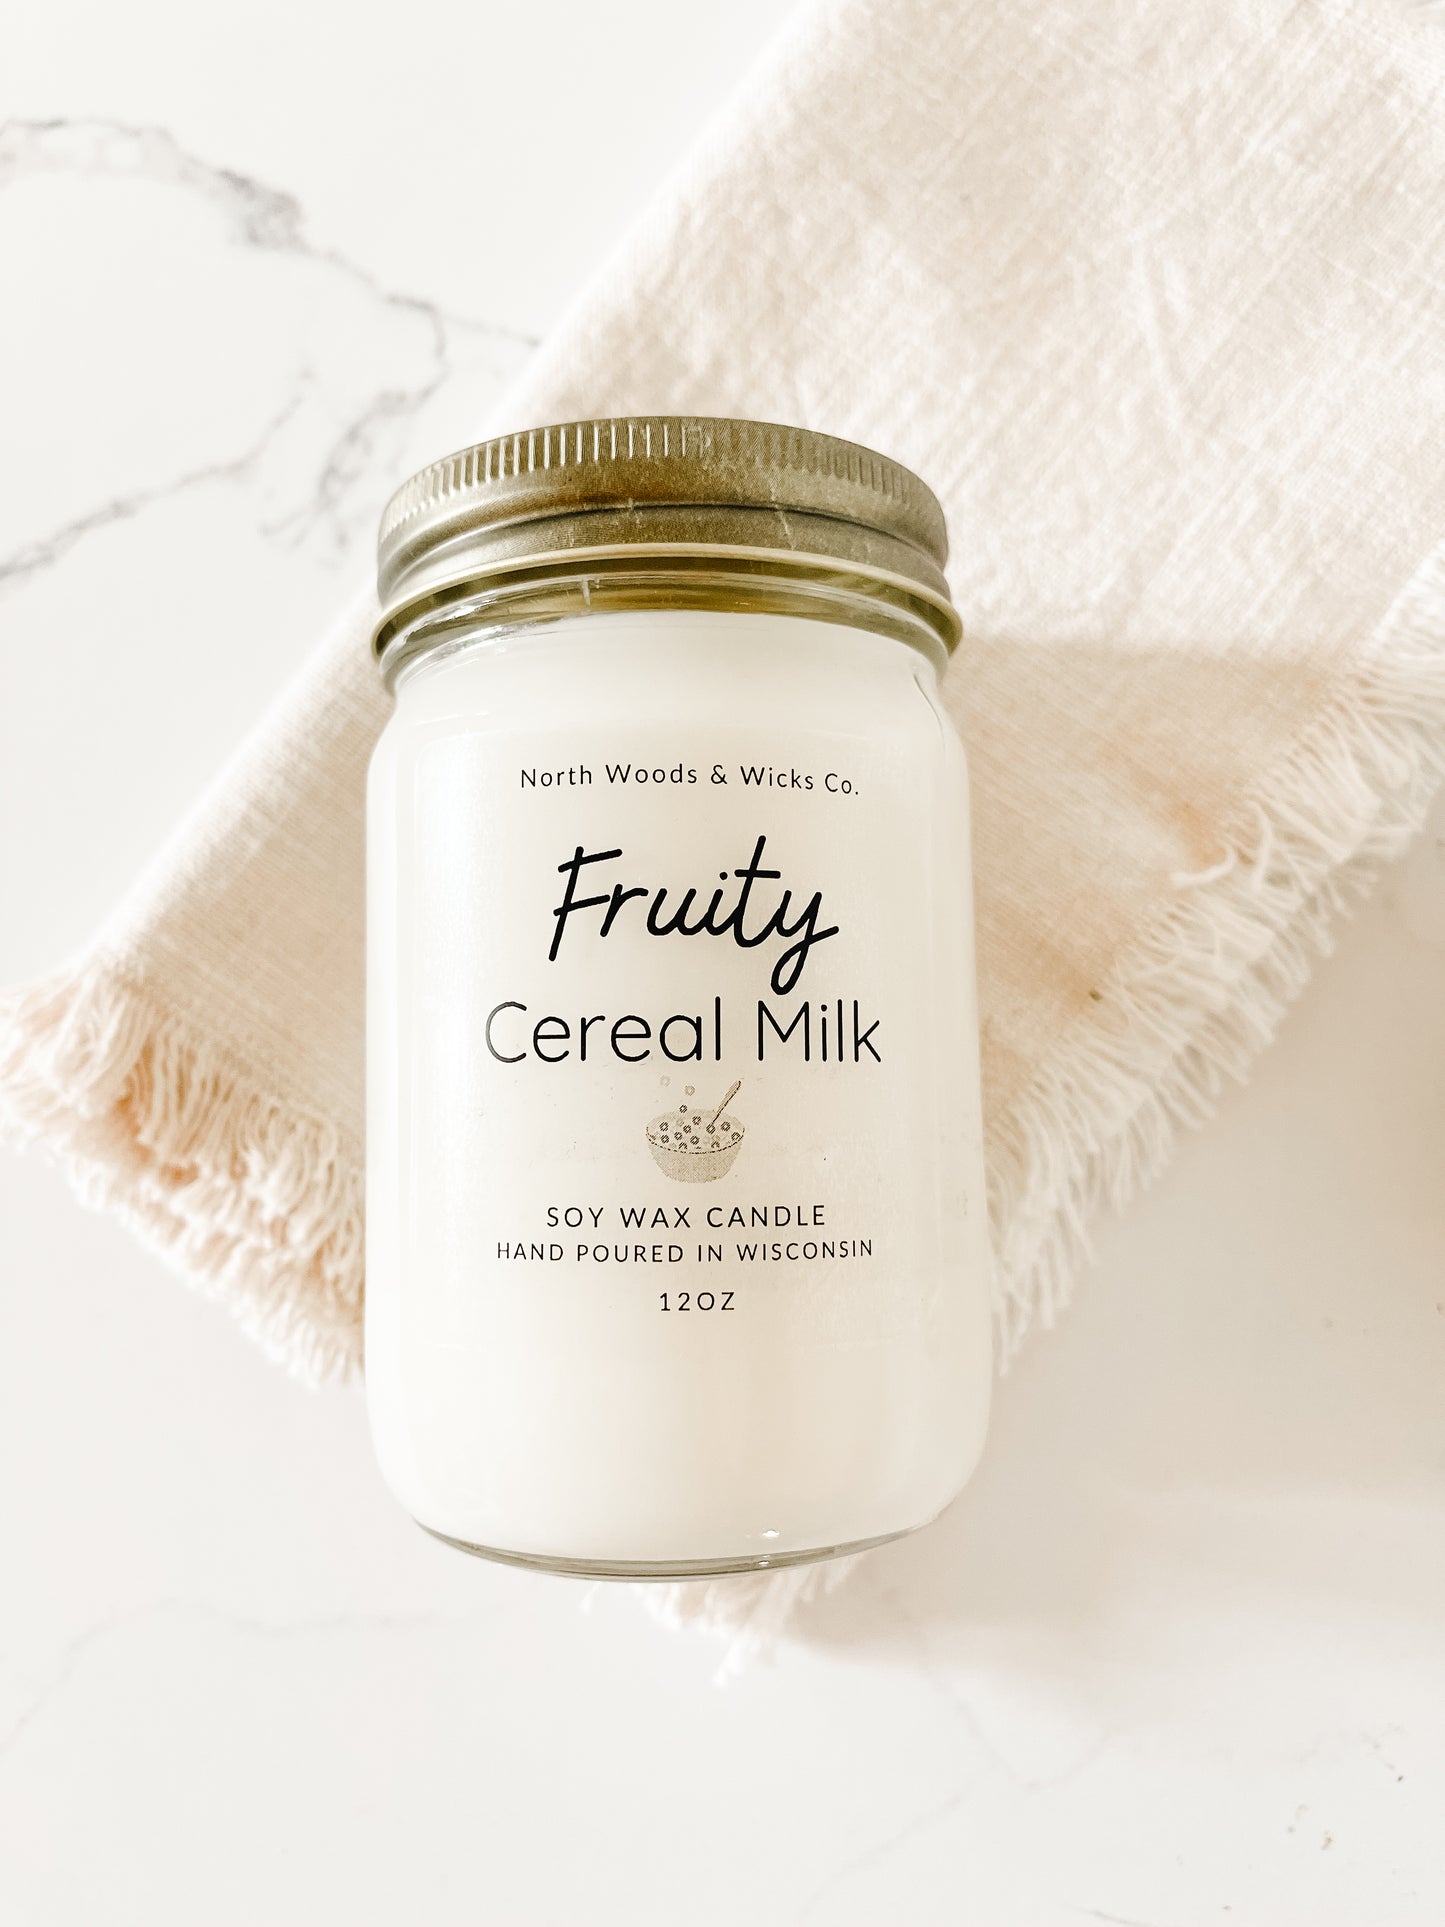 Fruity Cereal Milk 12oz Candle